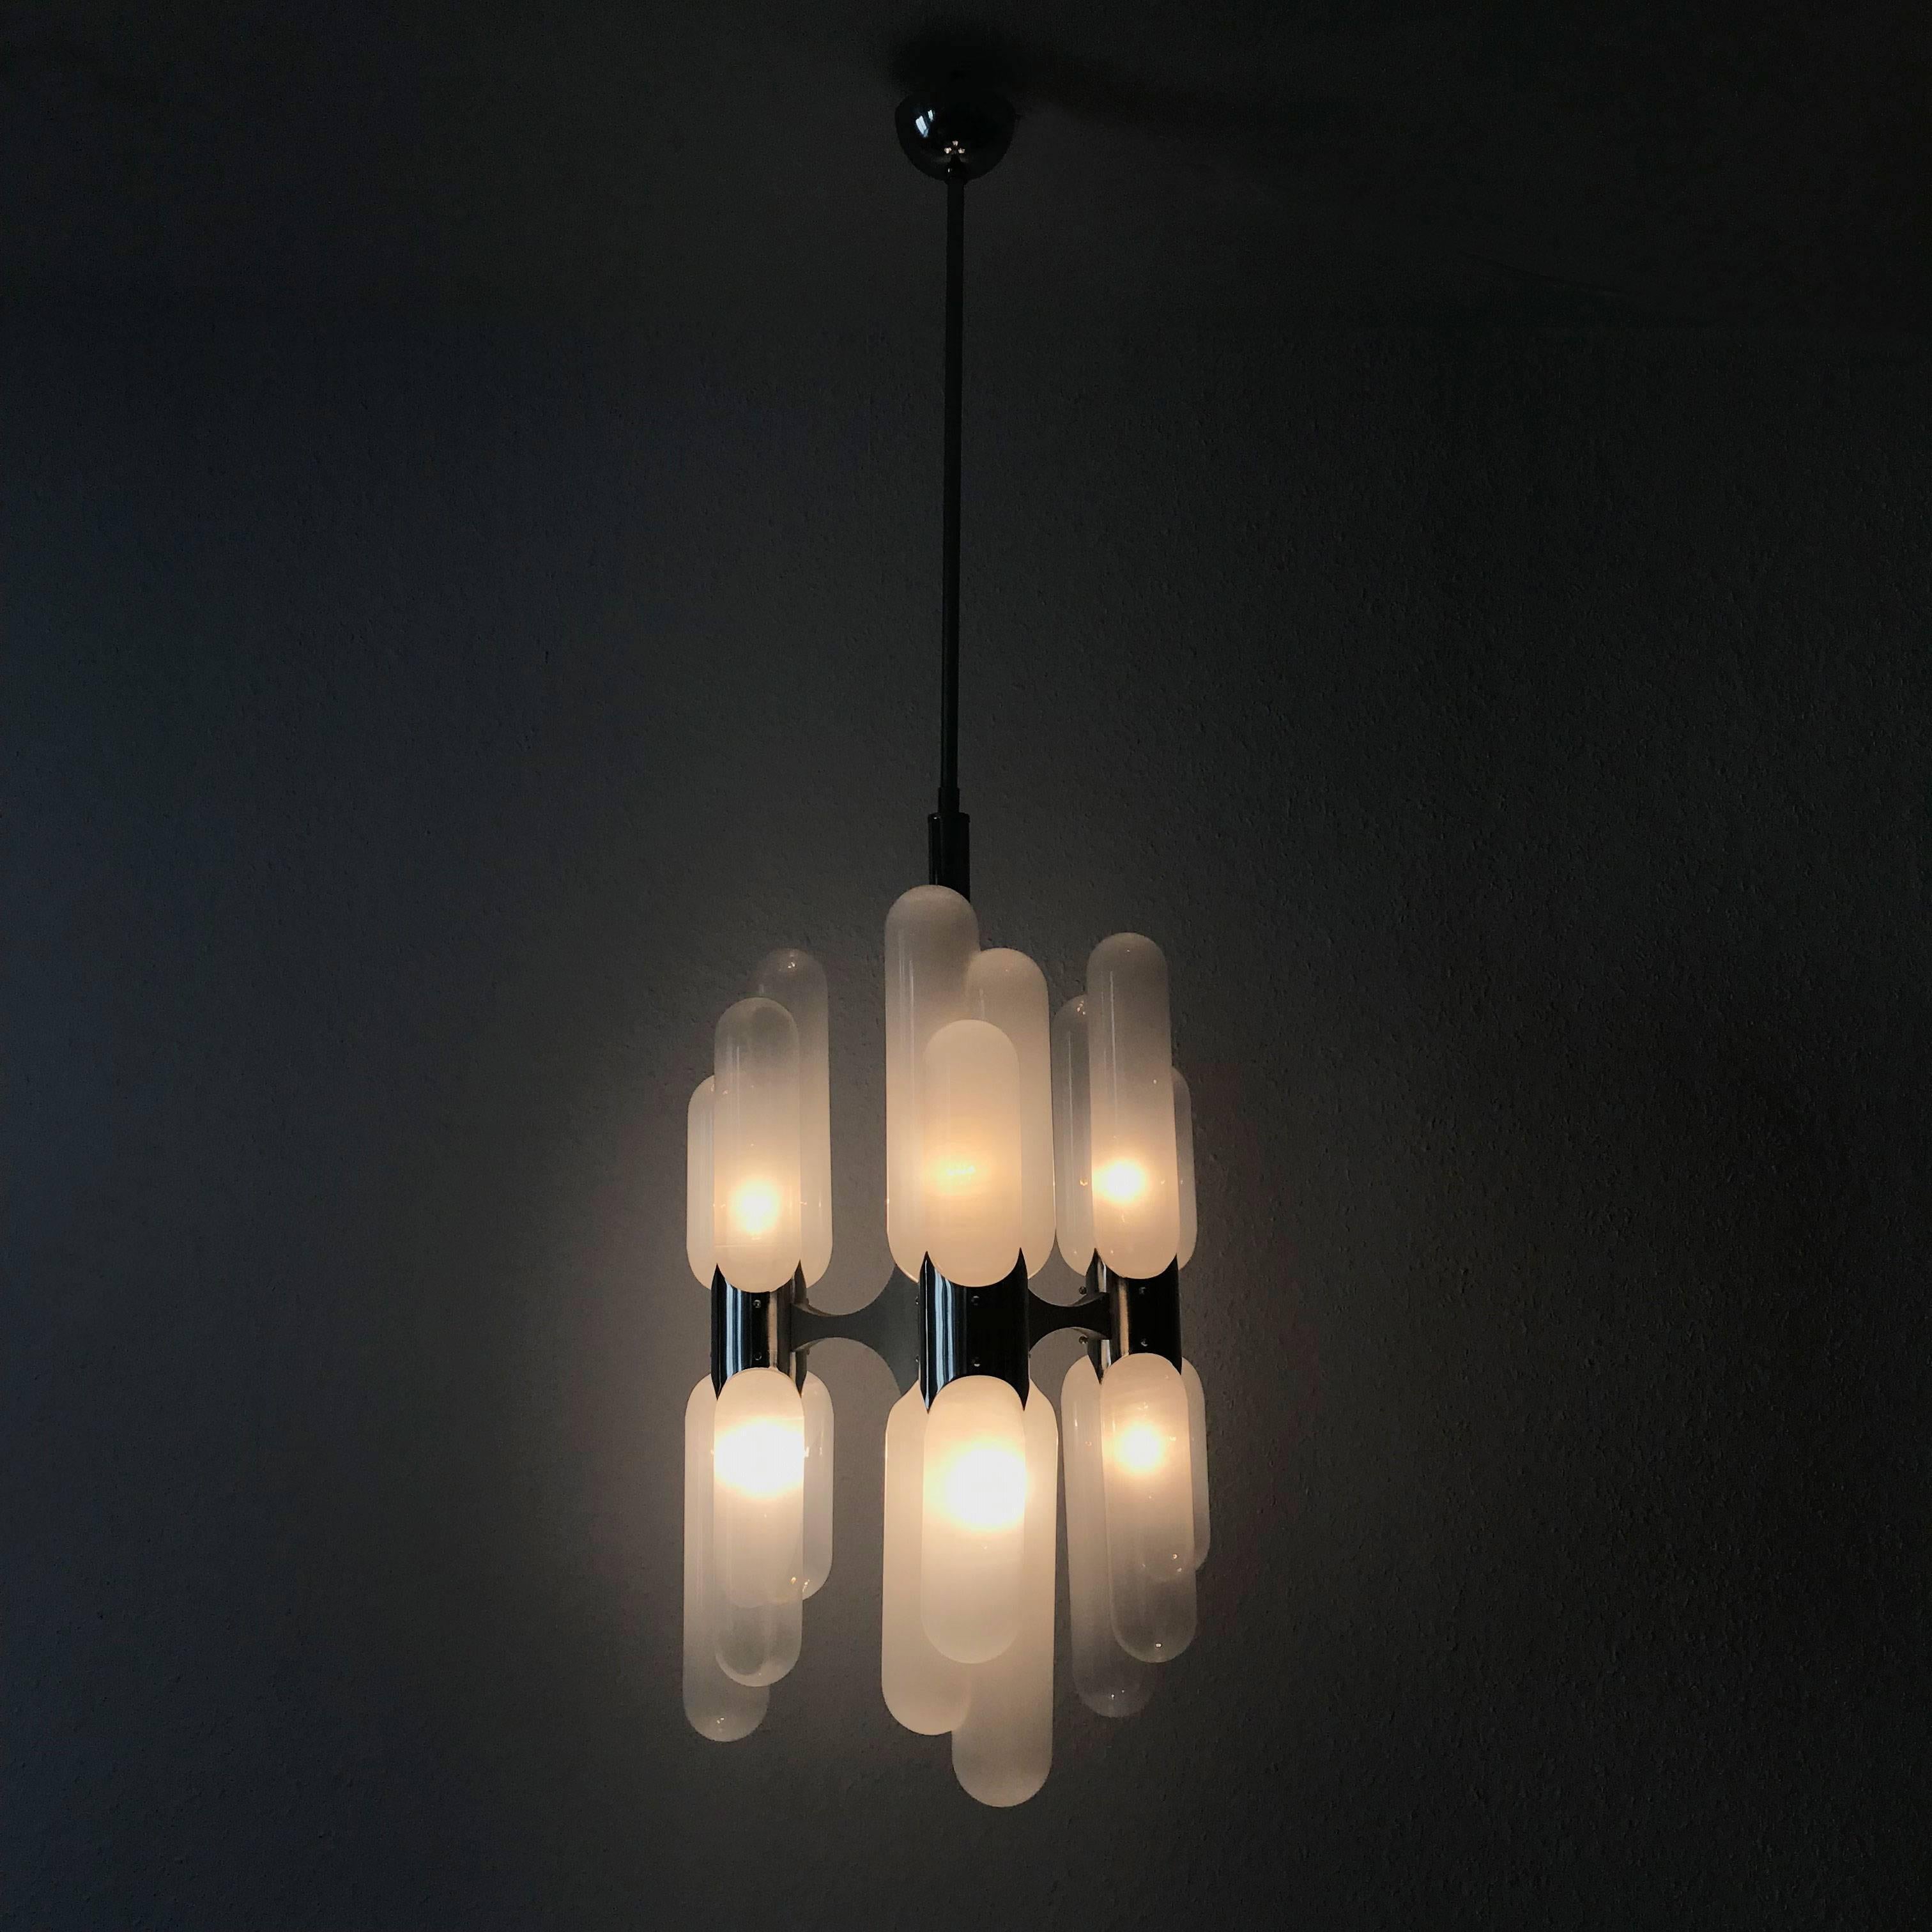 Stunning Torpedo chandelier with six handblown opaline glass shades and nickel-plated body. Designed by Carlo Nason in 1960s. Manufactured by Mazzega, Italy in 1960s. The lamp needs six E14 screw fit bulb holders.